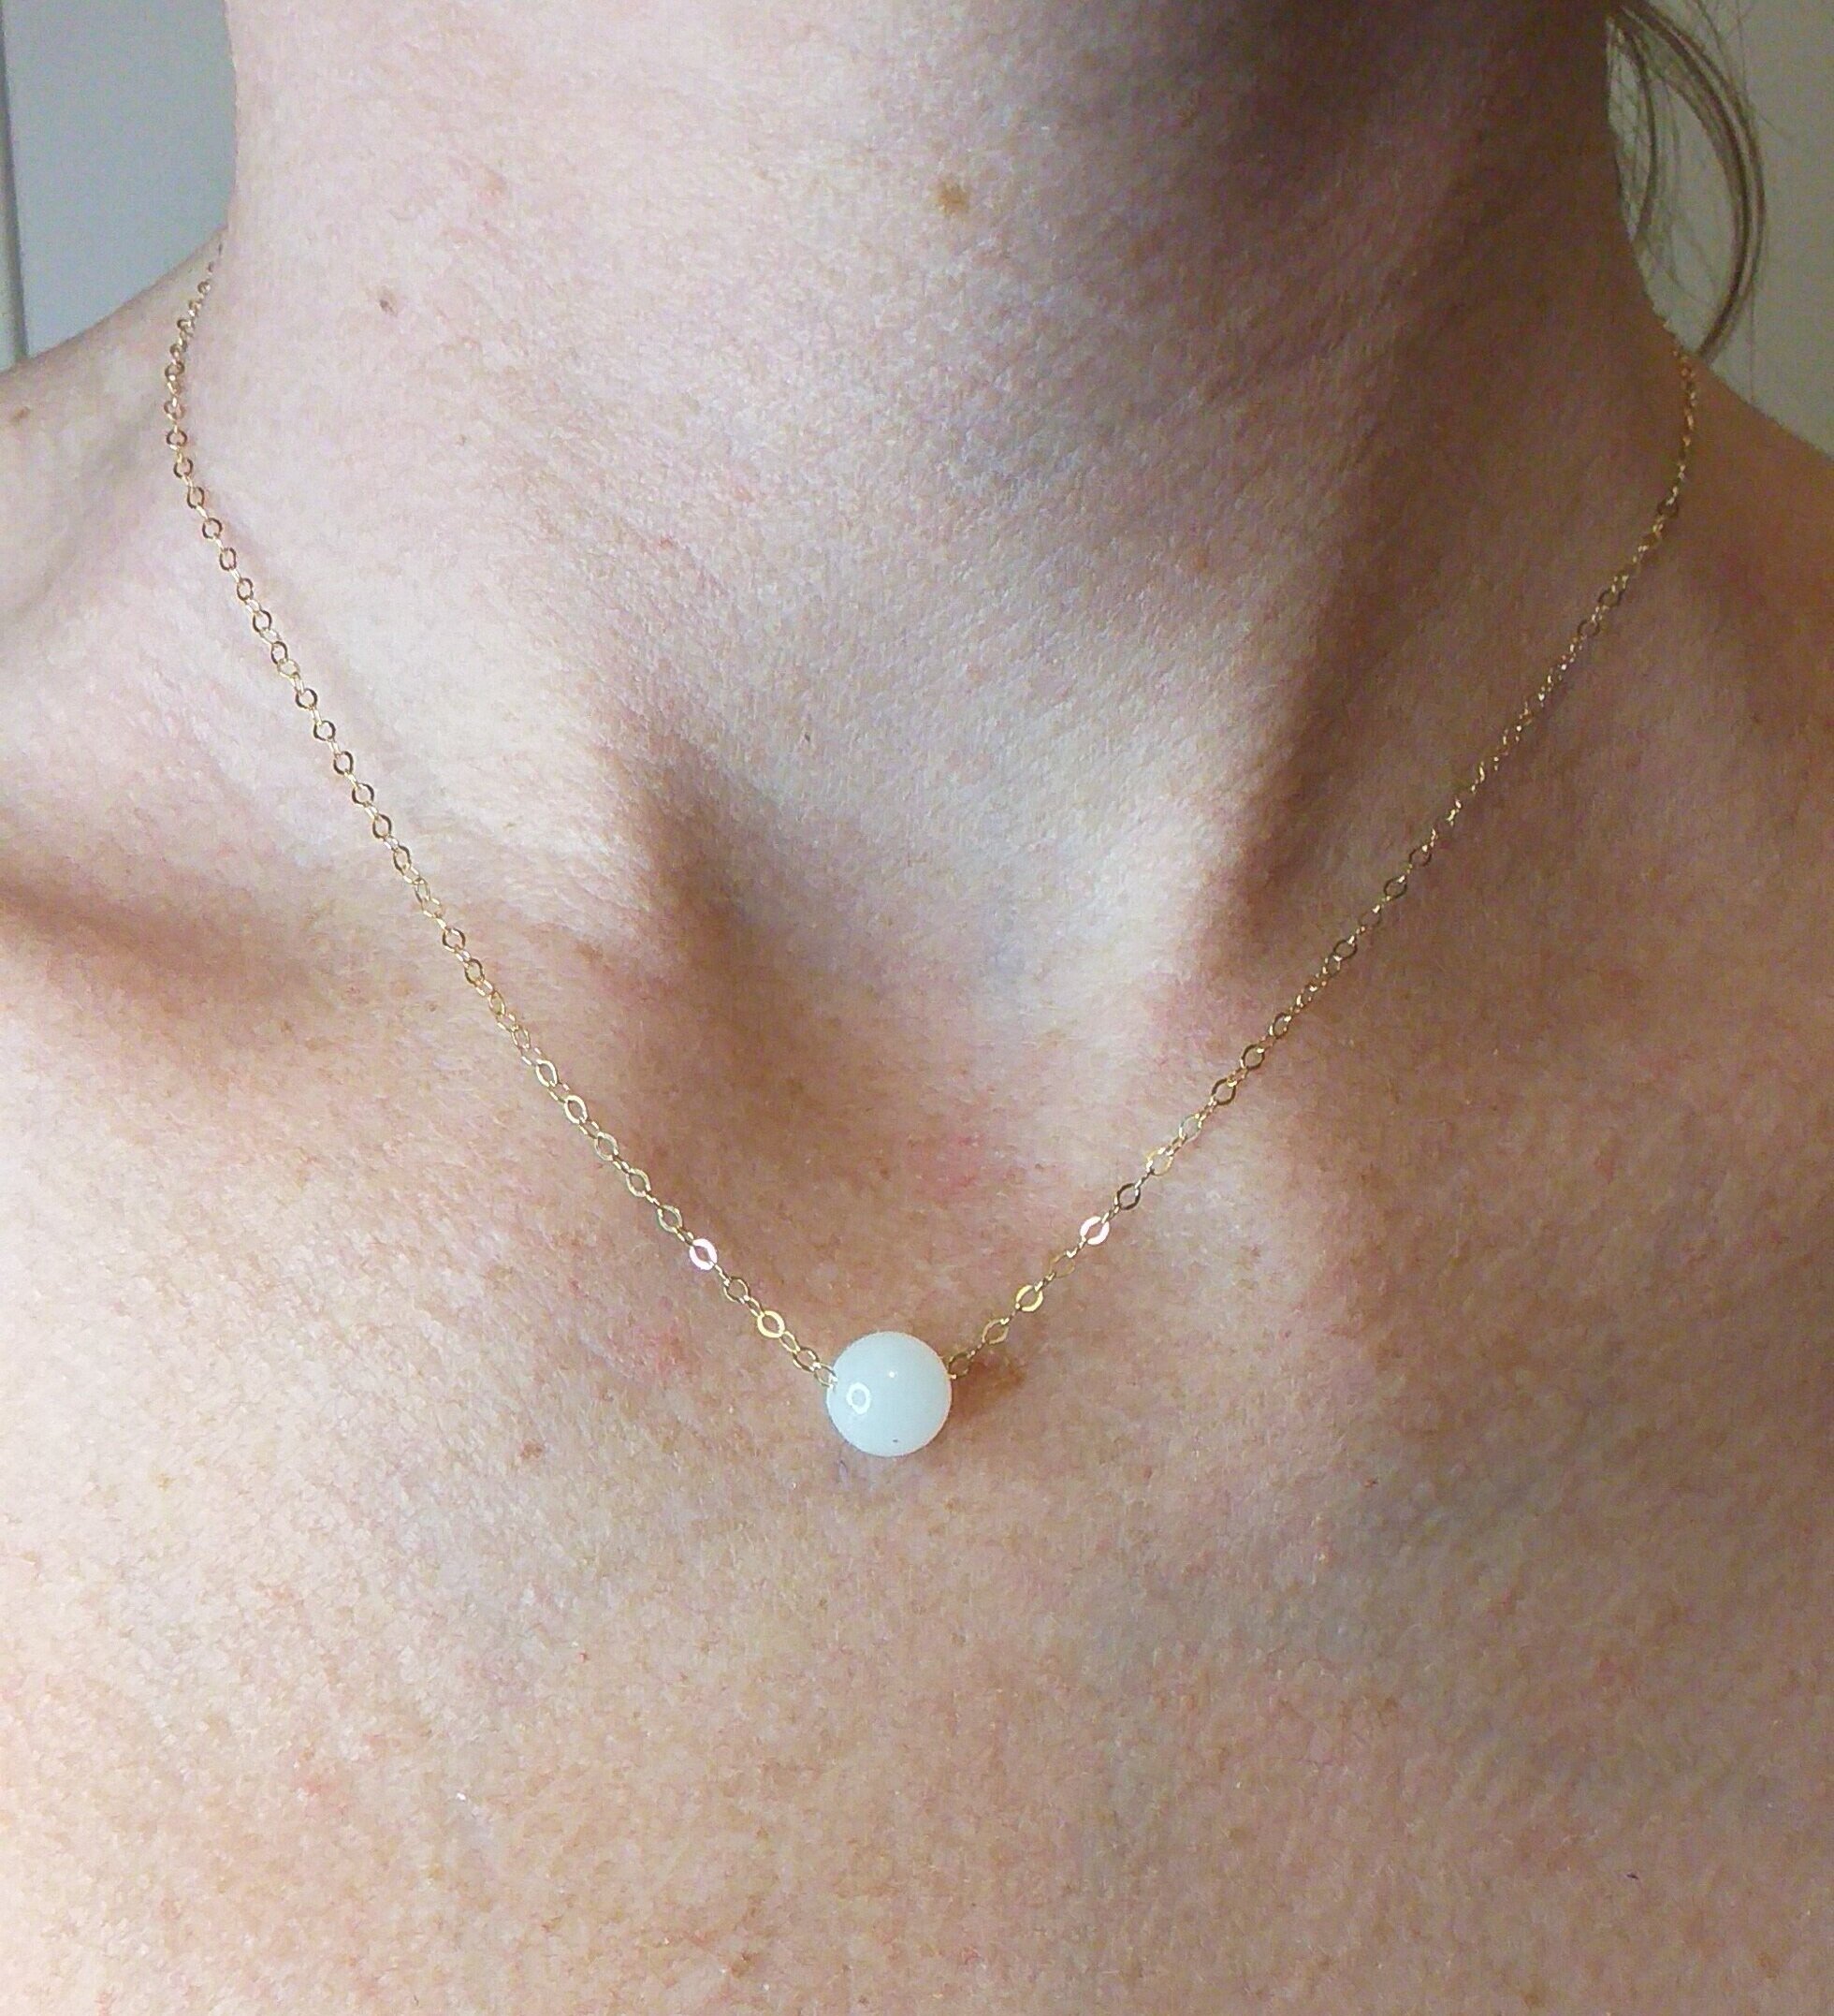 How To Easily Make Your Own Breast Milk Jewelry - Something Turquoise